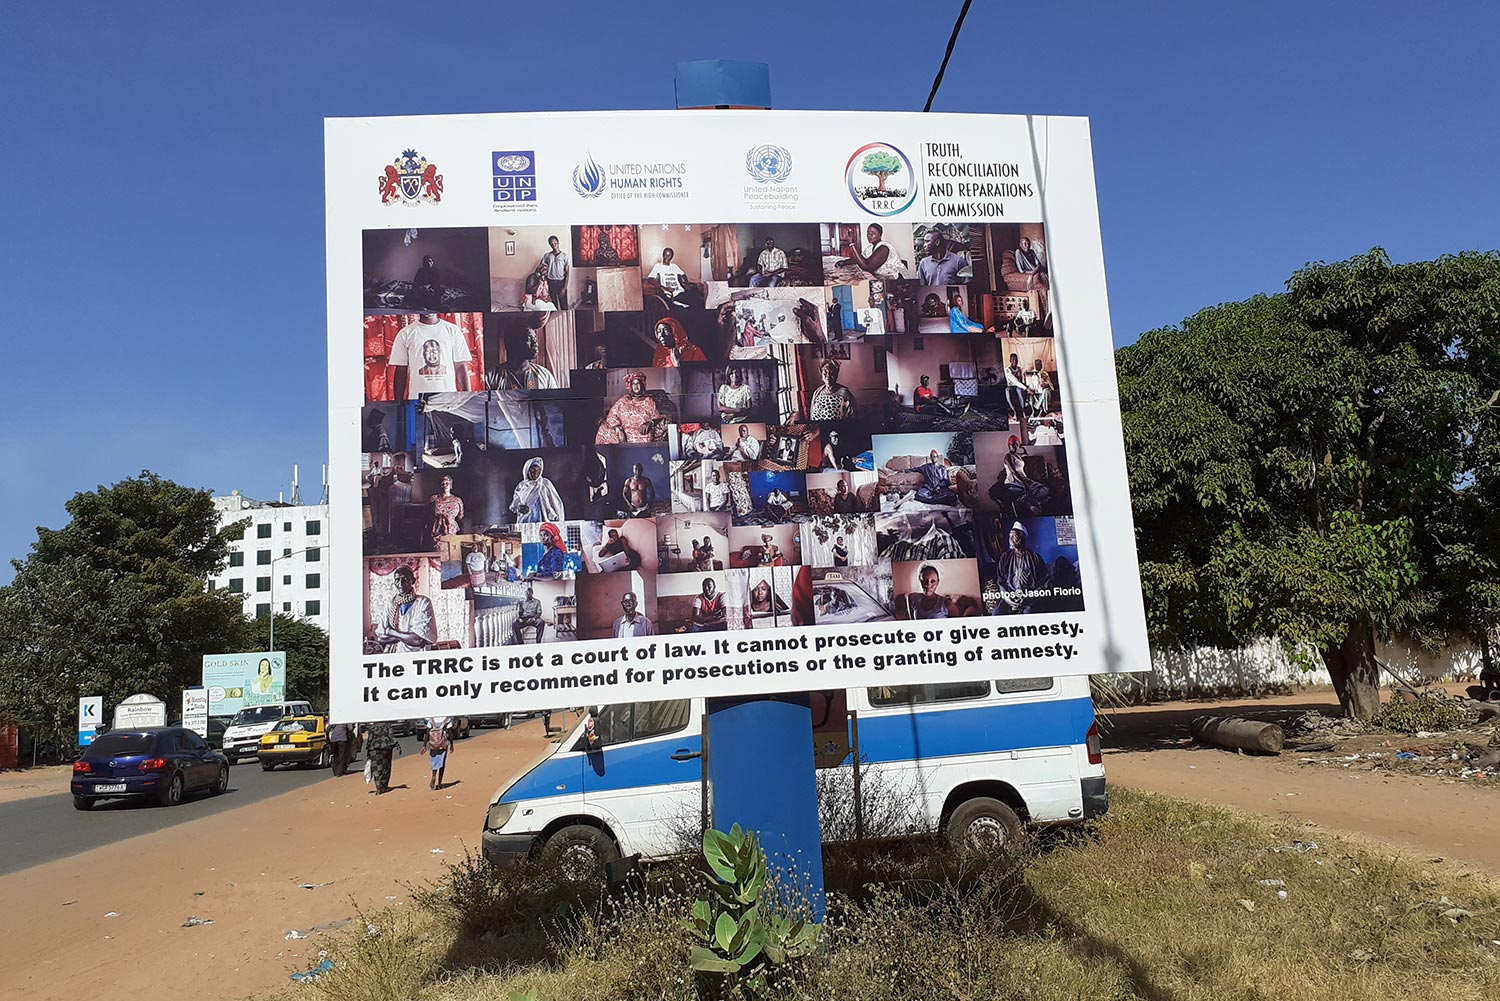 Billboard for the TRRC in The Gambia